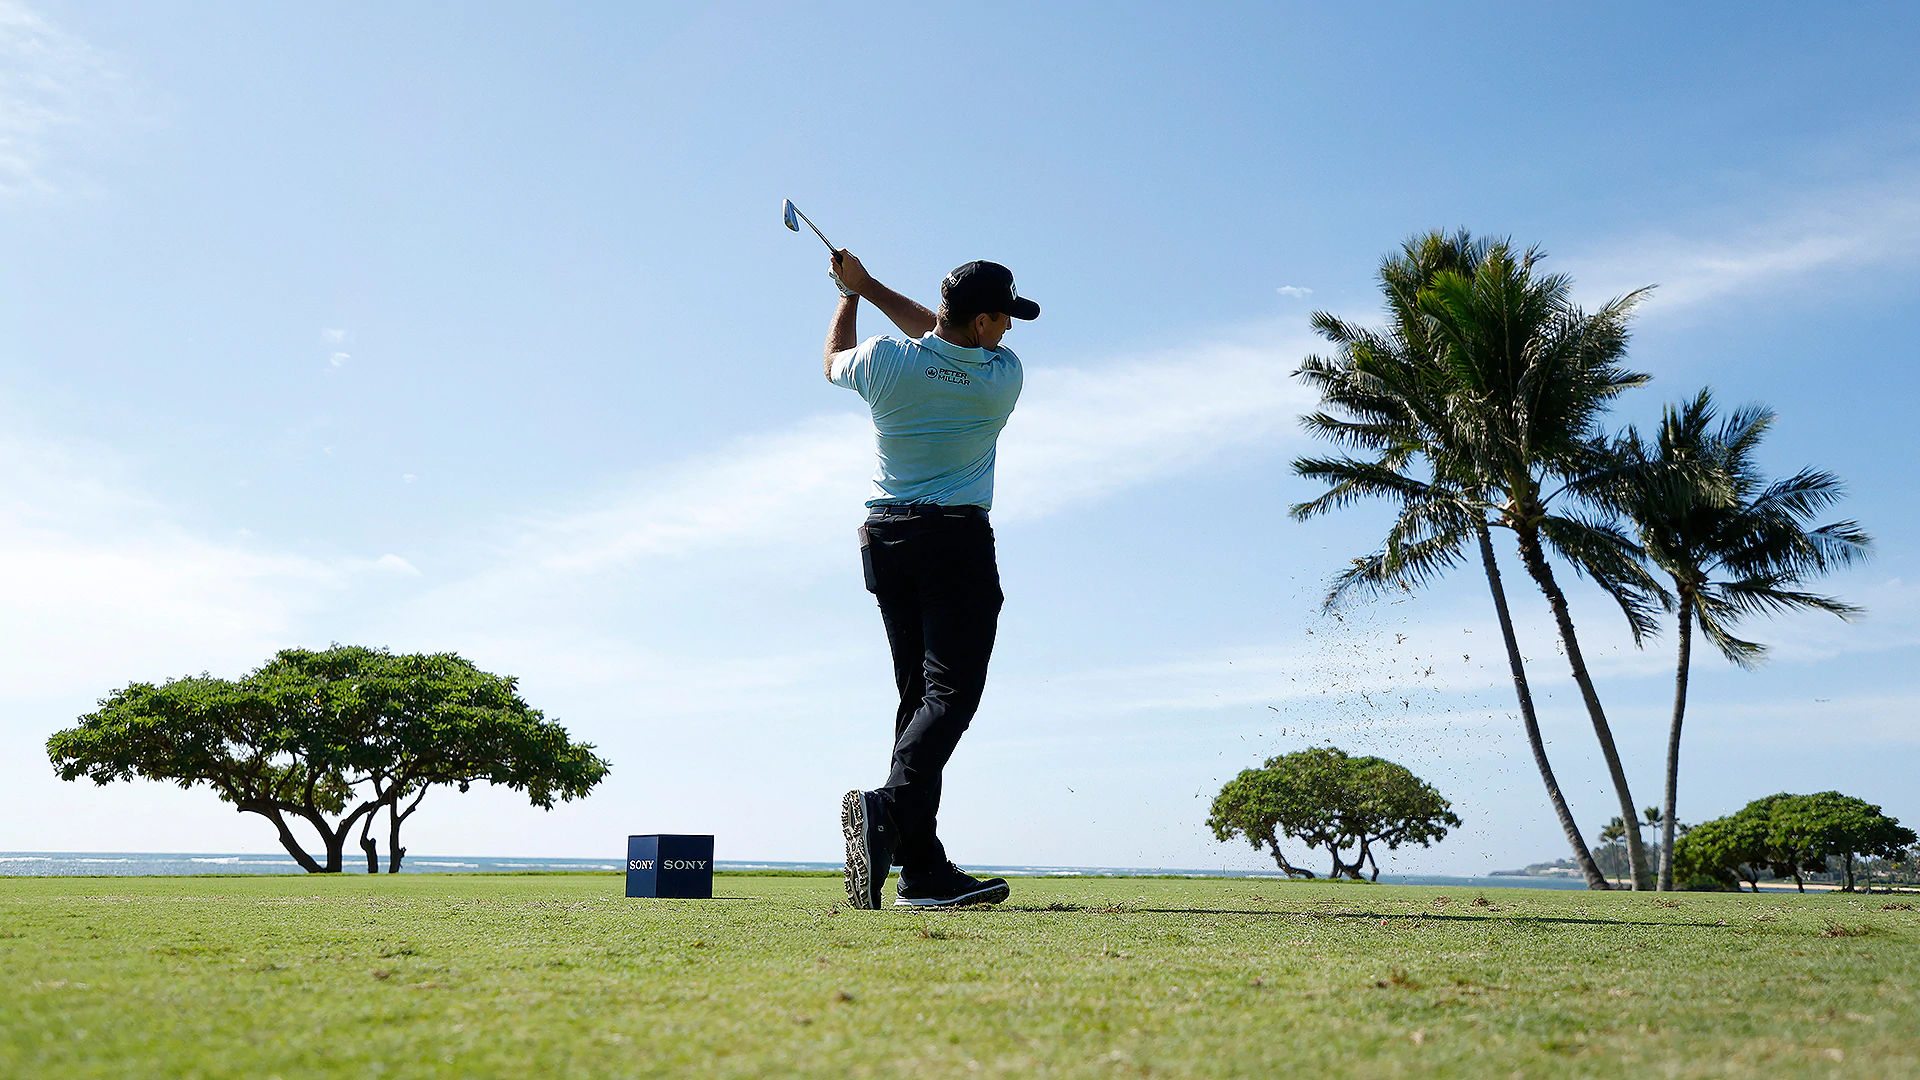 Another tournament in Hawaii, a fresh start for most players